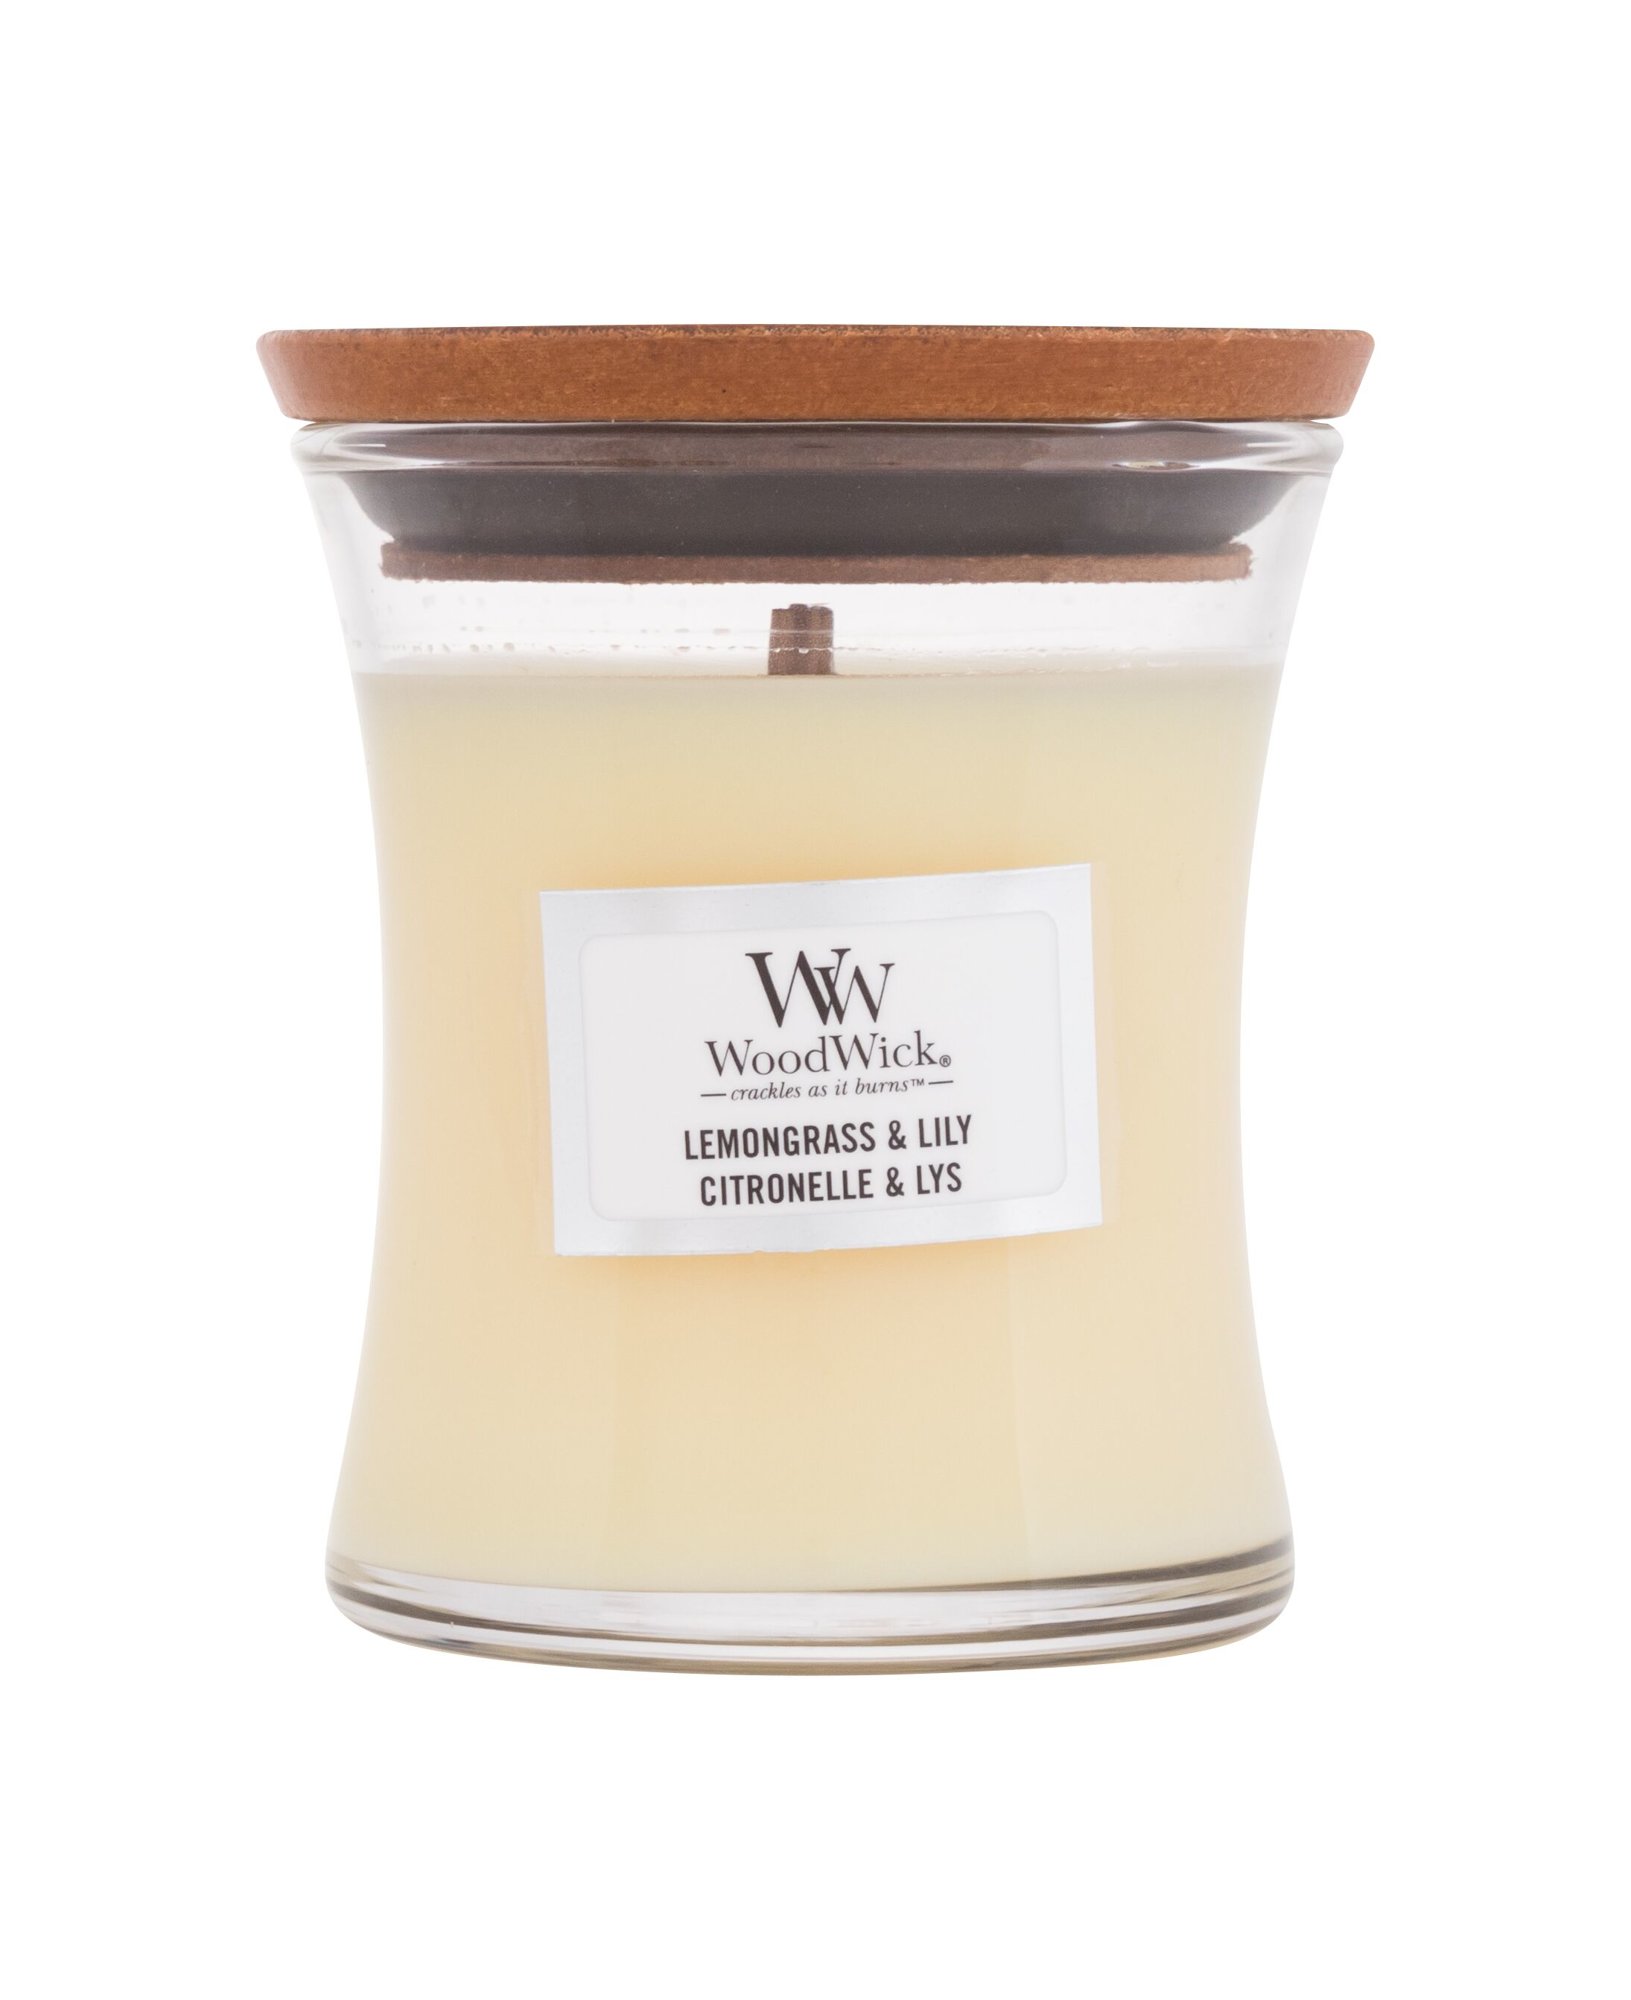 WoodWick Lemongrass & Lily 85g Kvepalai Unisex Scented Candle